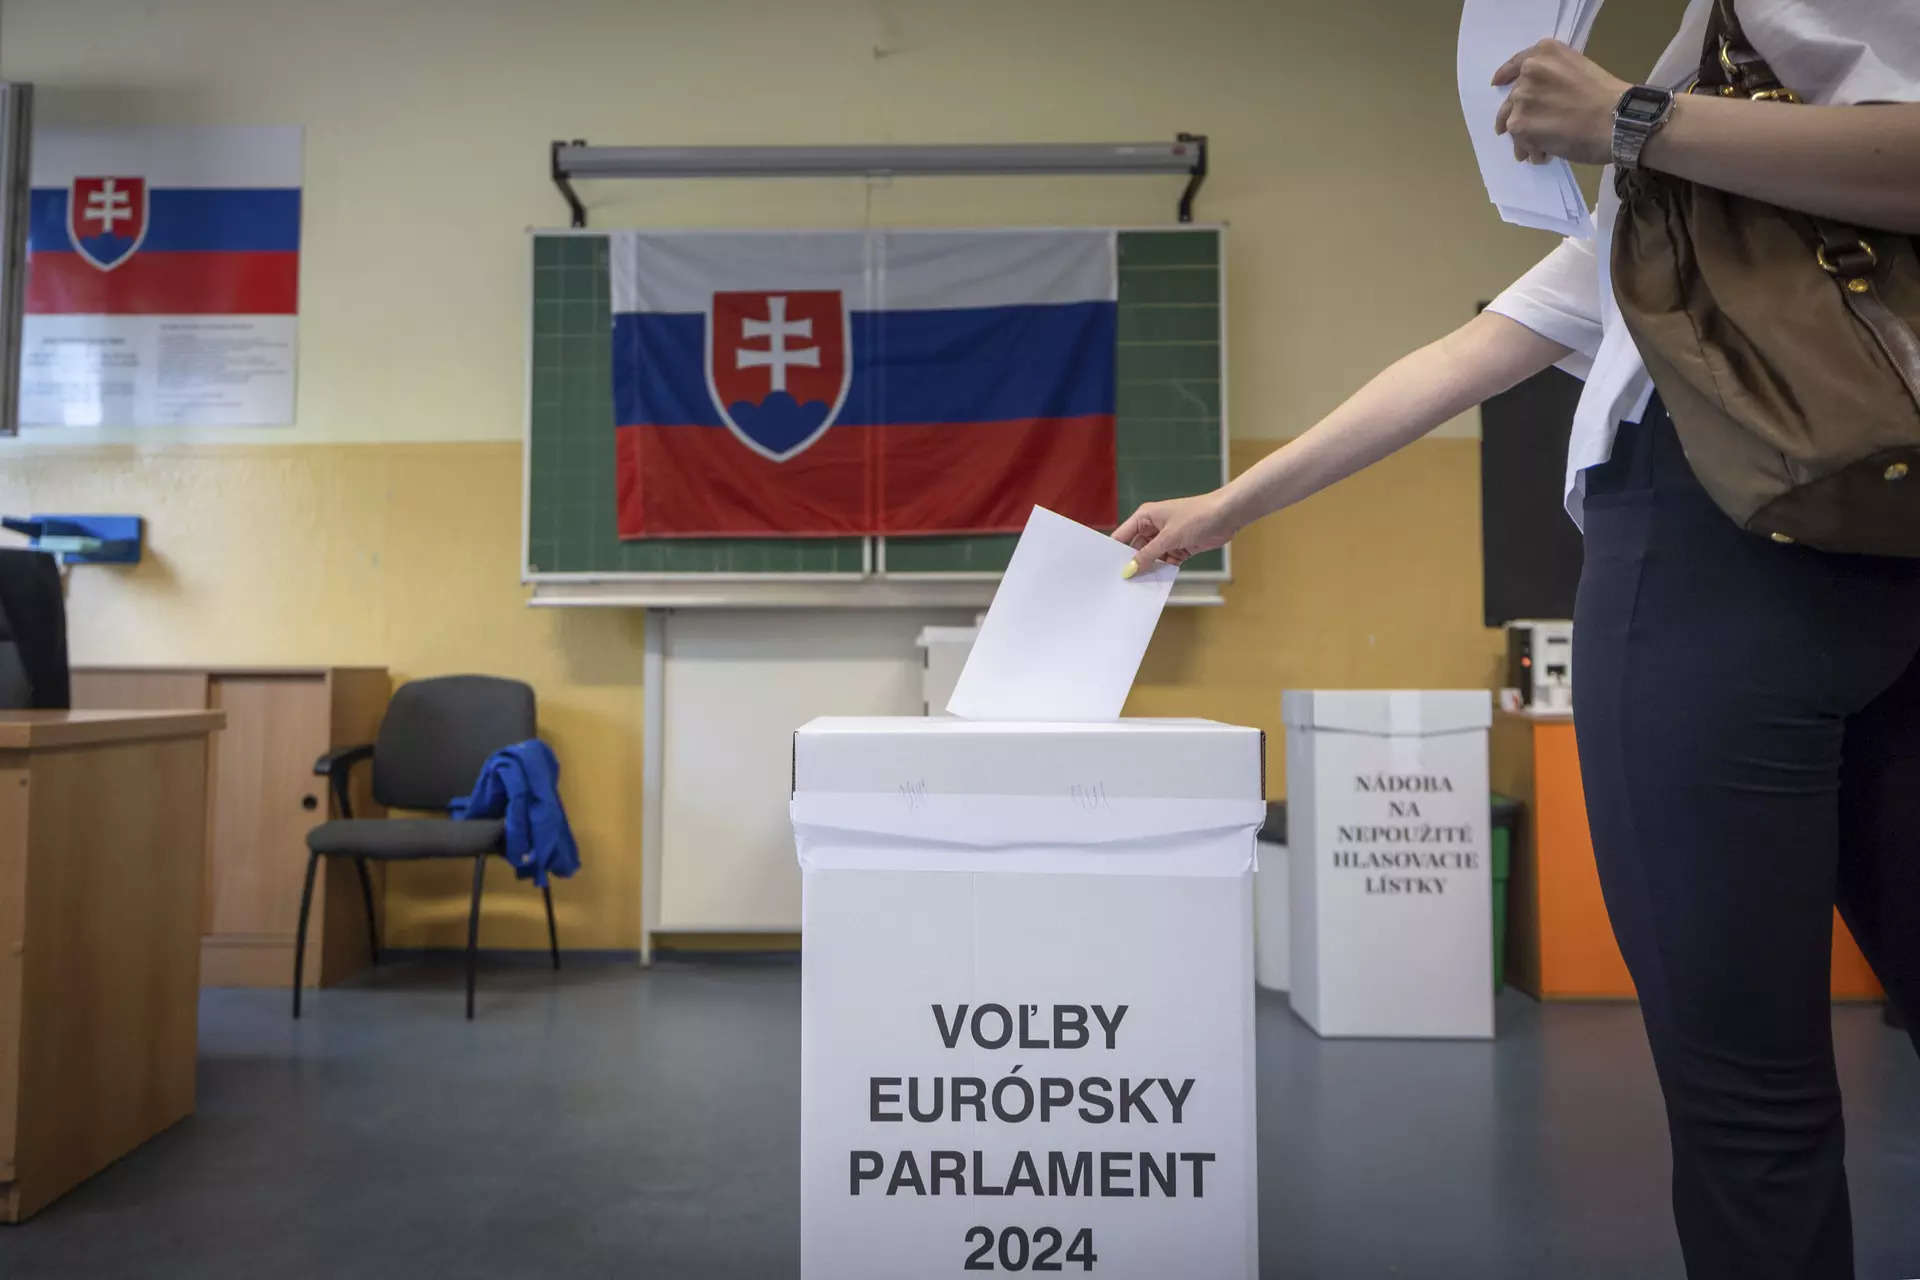 Slovaks and others go to the polls in EU elections under the shadow of an assassination attempt